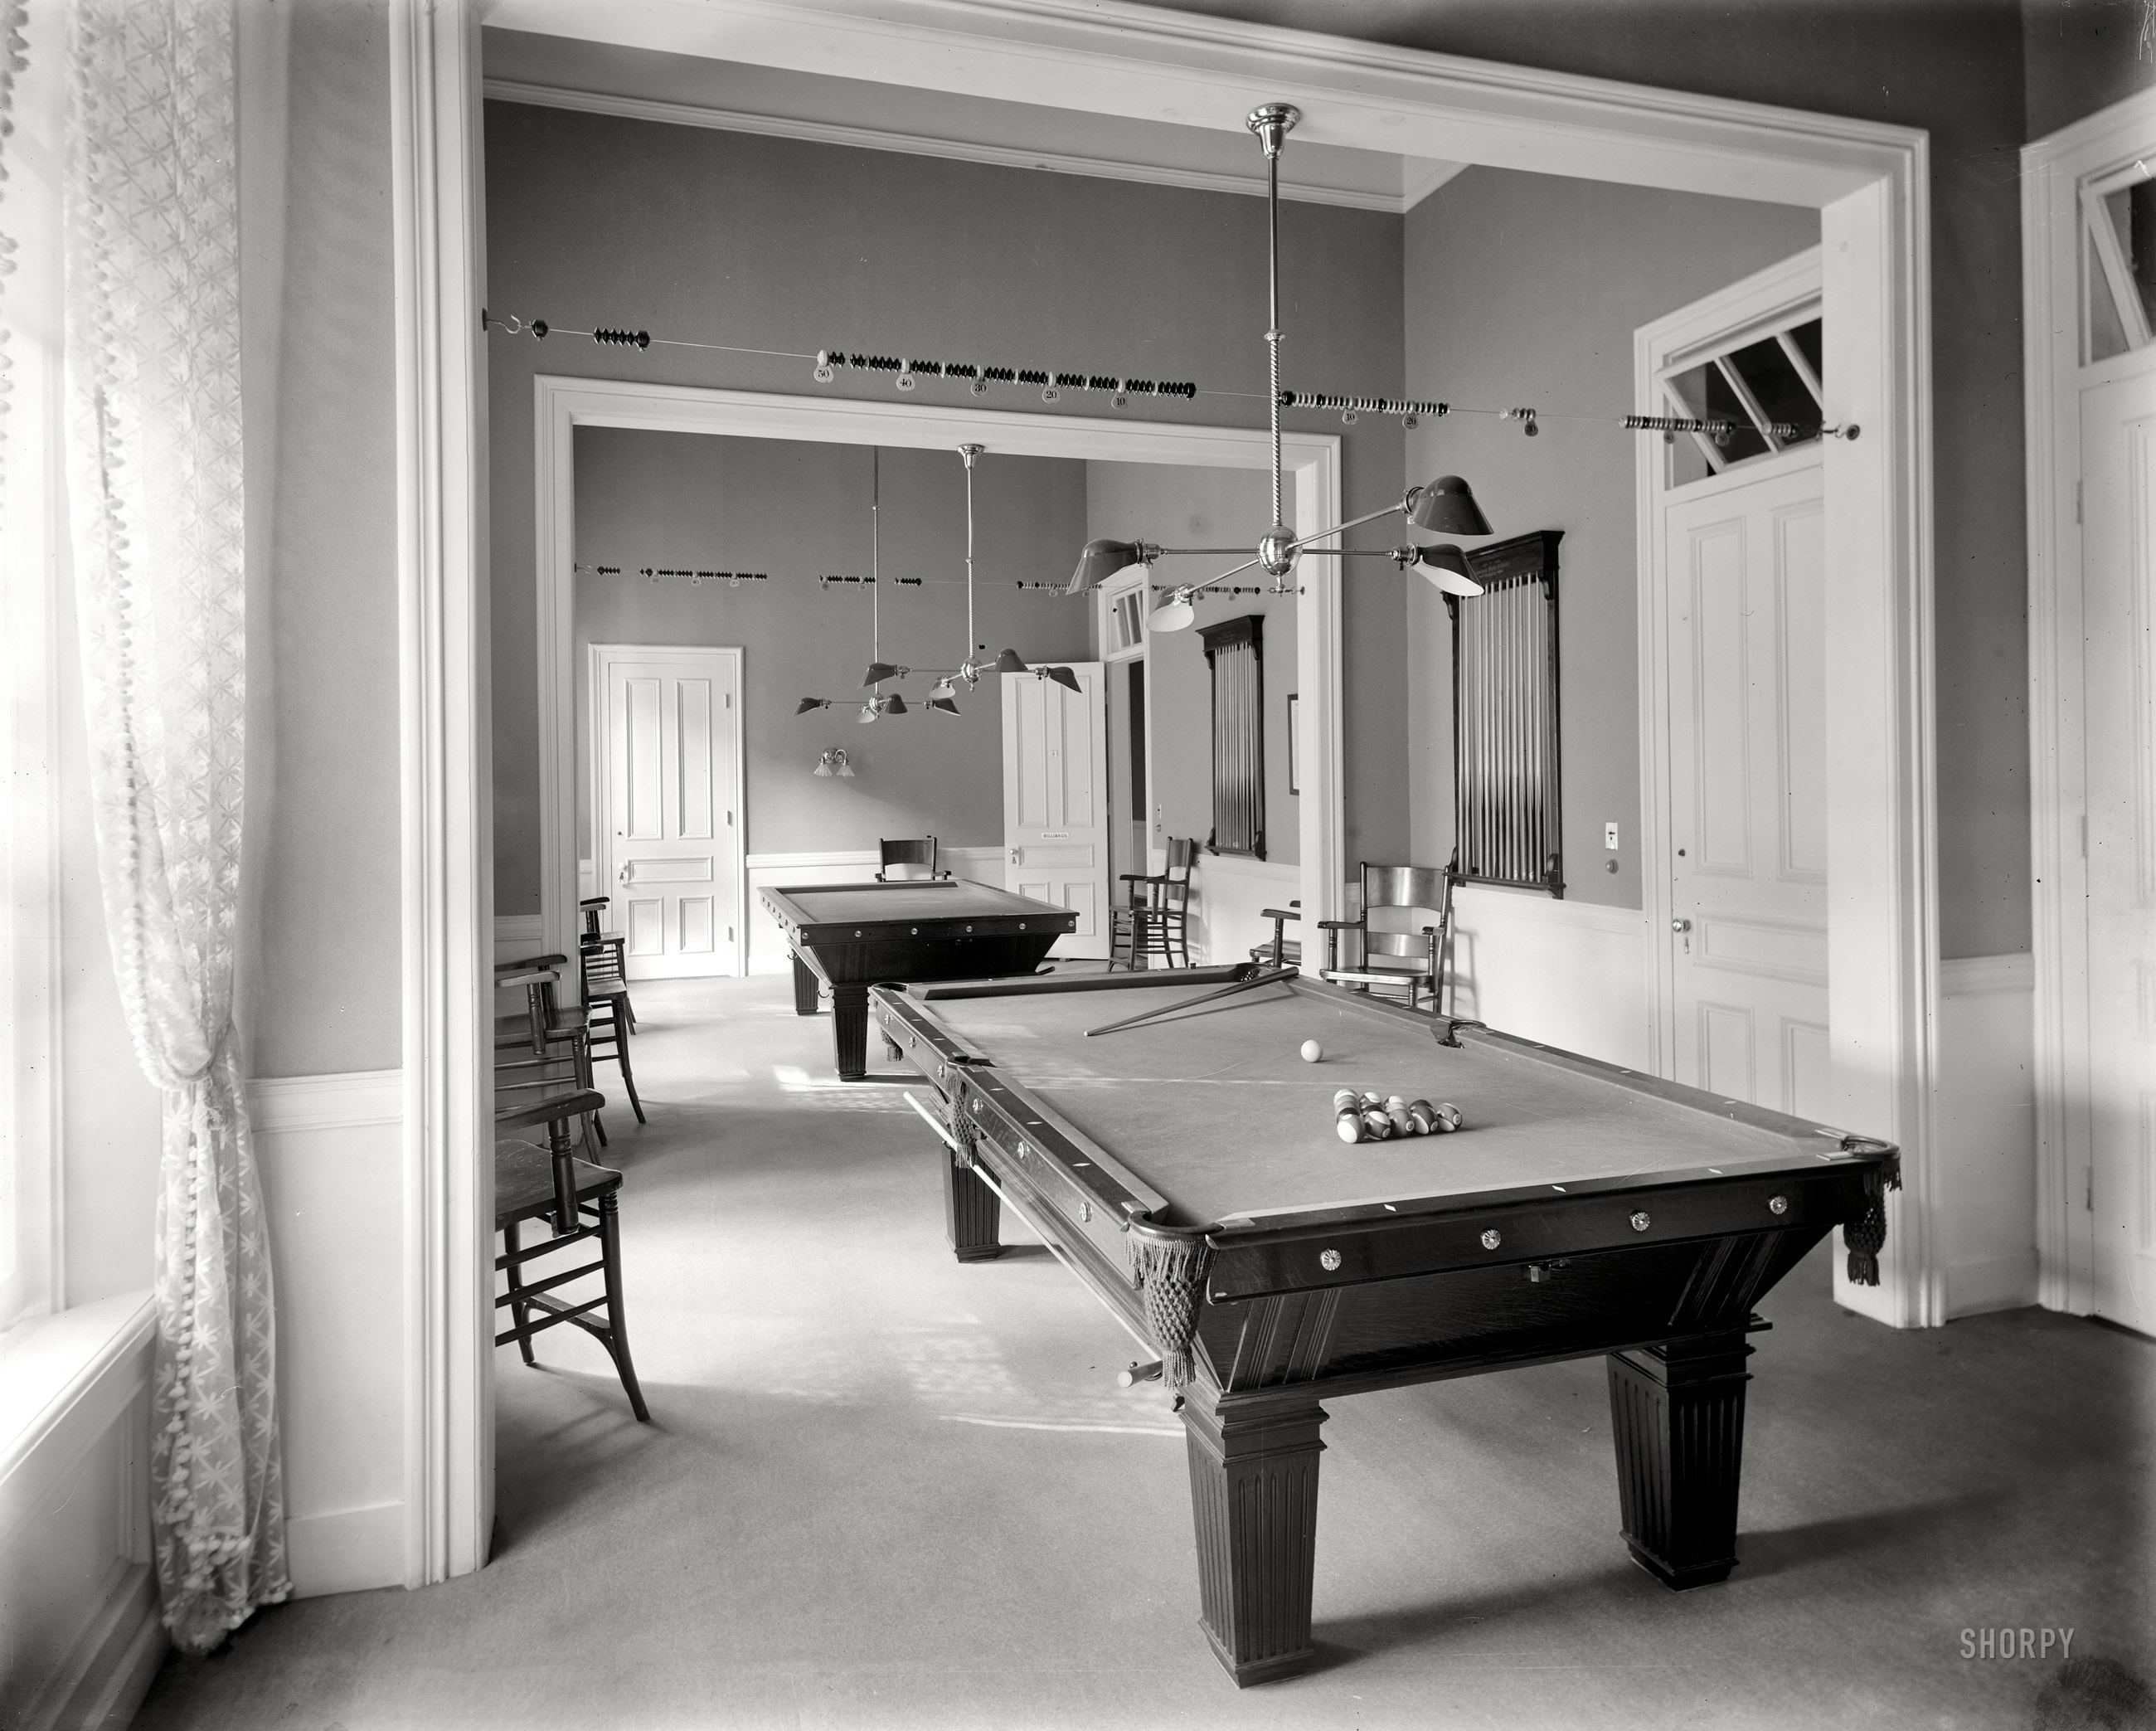 Lake George, New York, circa 1908. "Billiard room, Fort William Henry Hotel." 8x10 inch dry plate glass negative, Detroit Publishing Company. View full size.